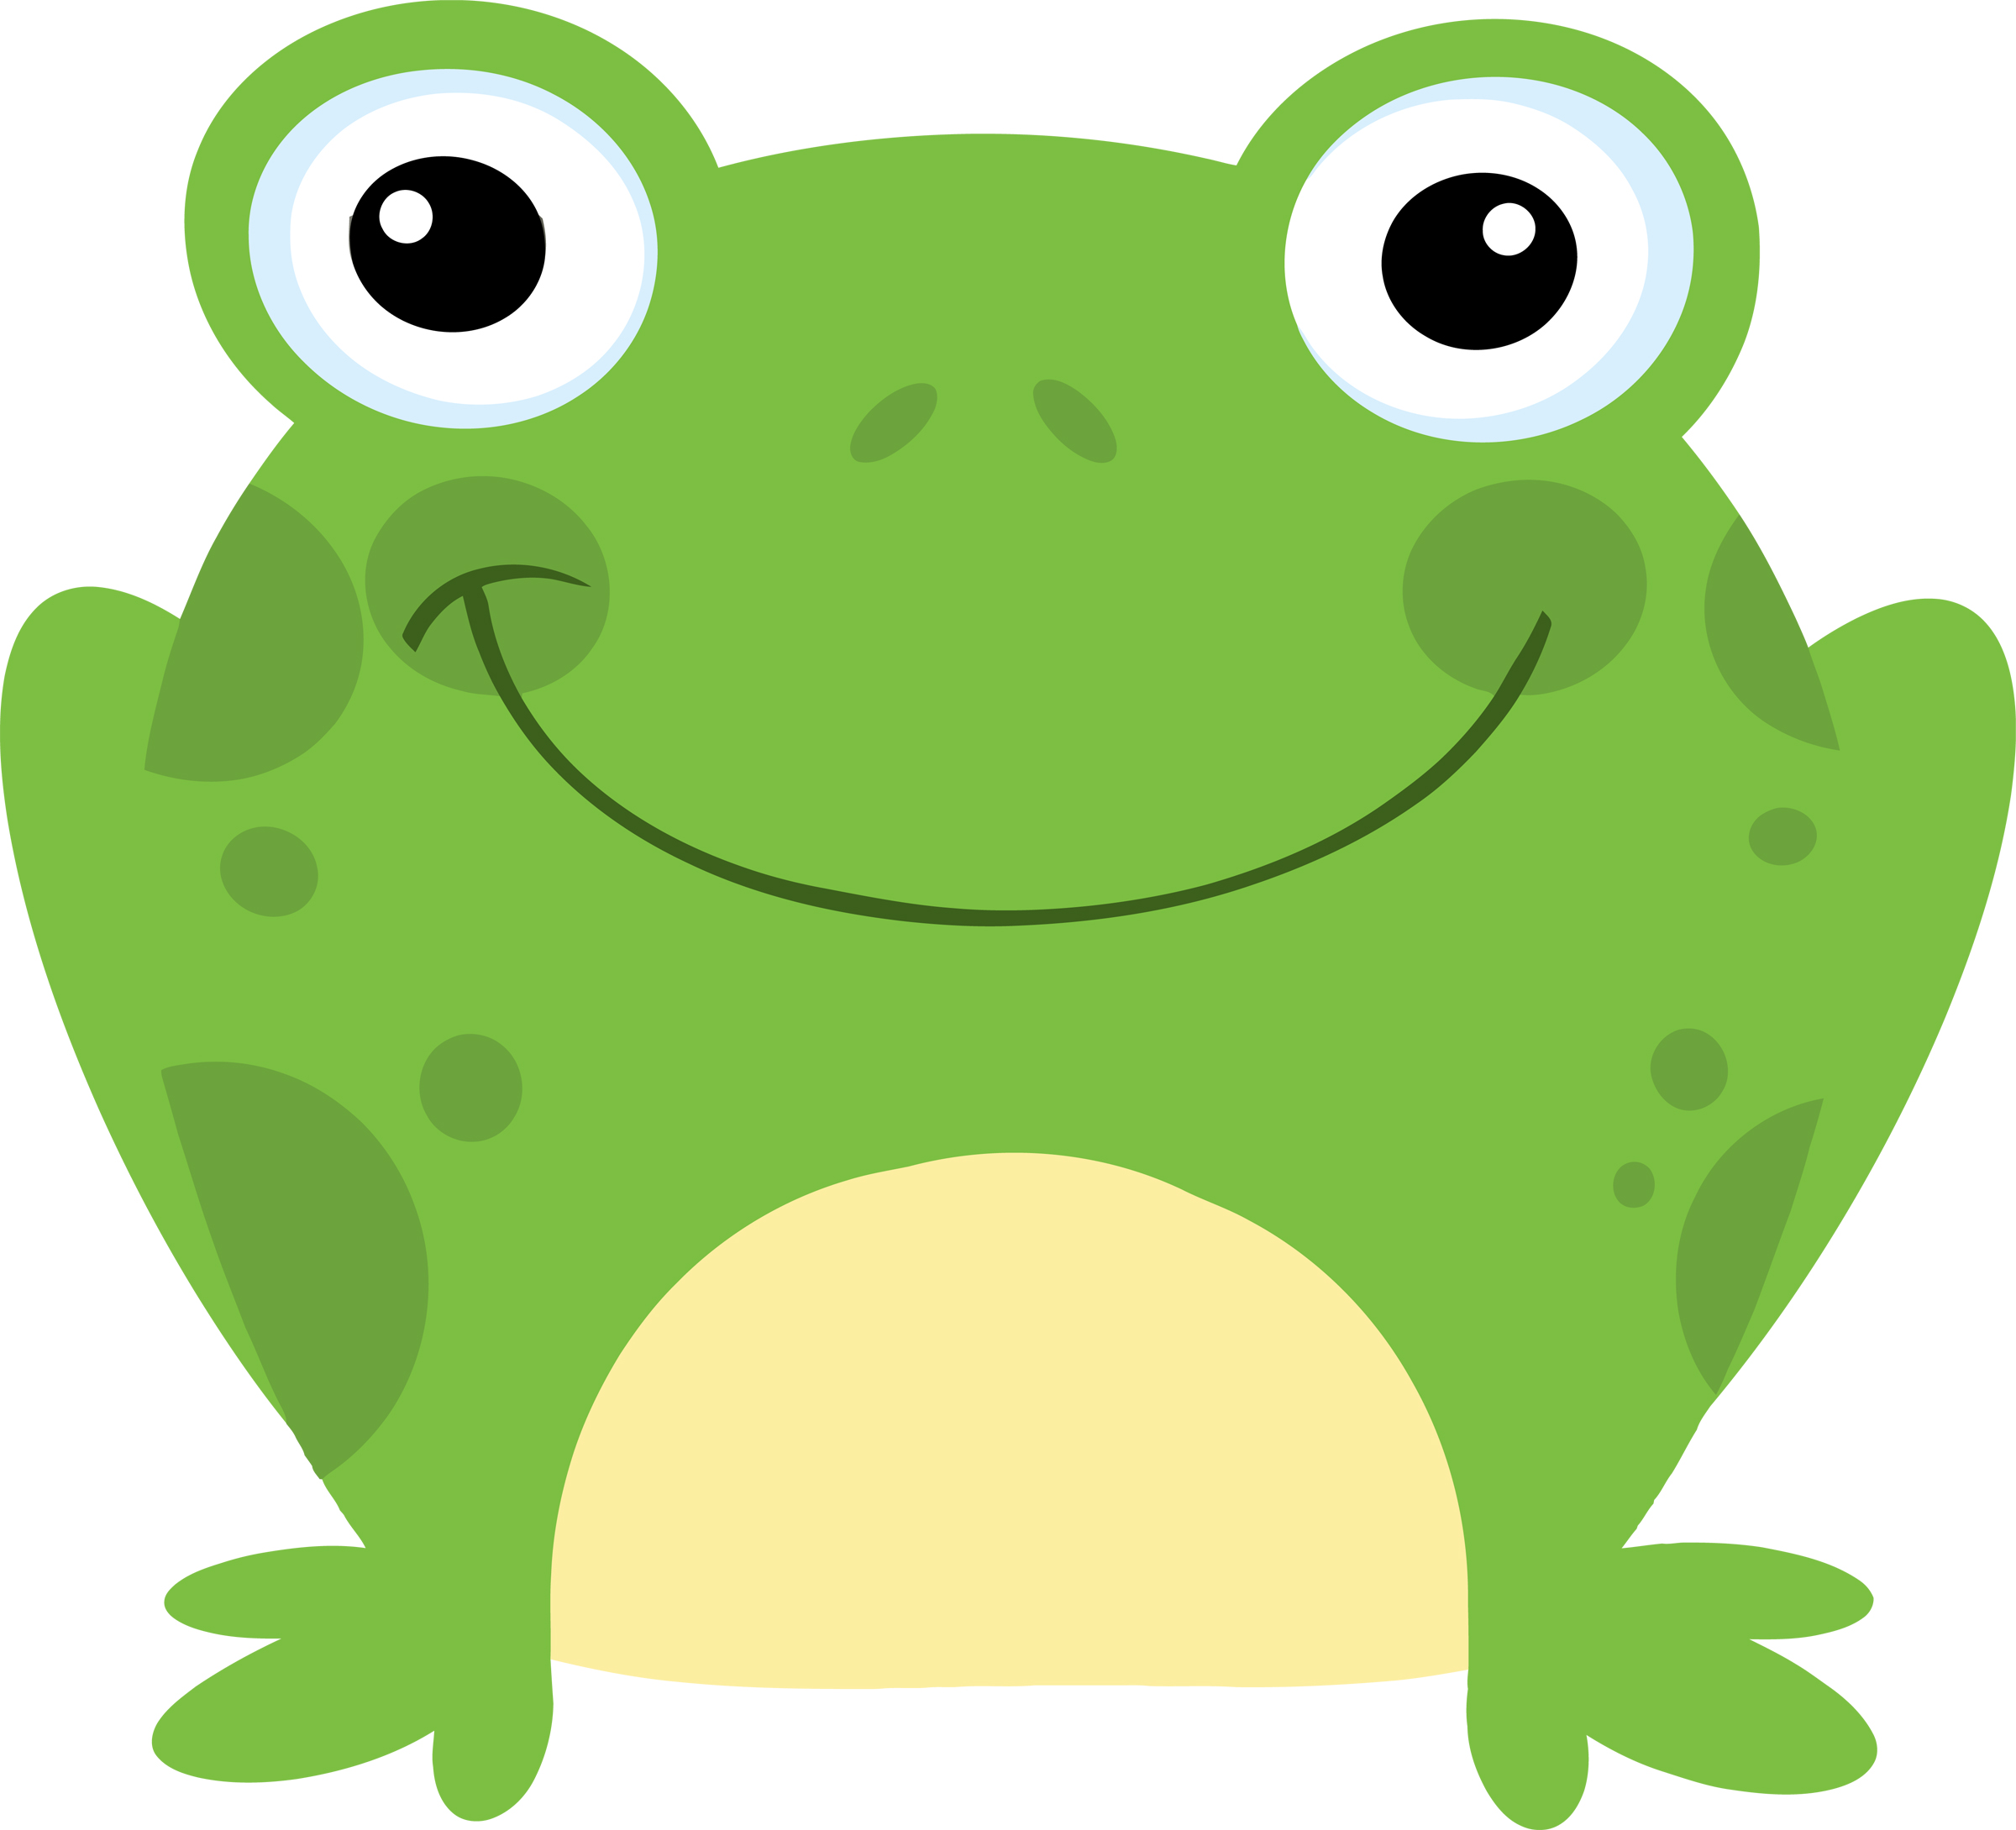 Frog clip art vector clipart cliparts for you